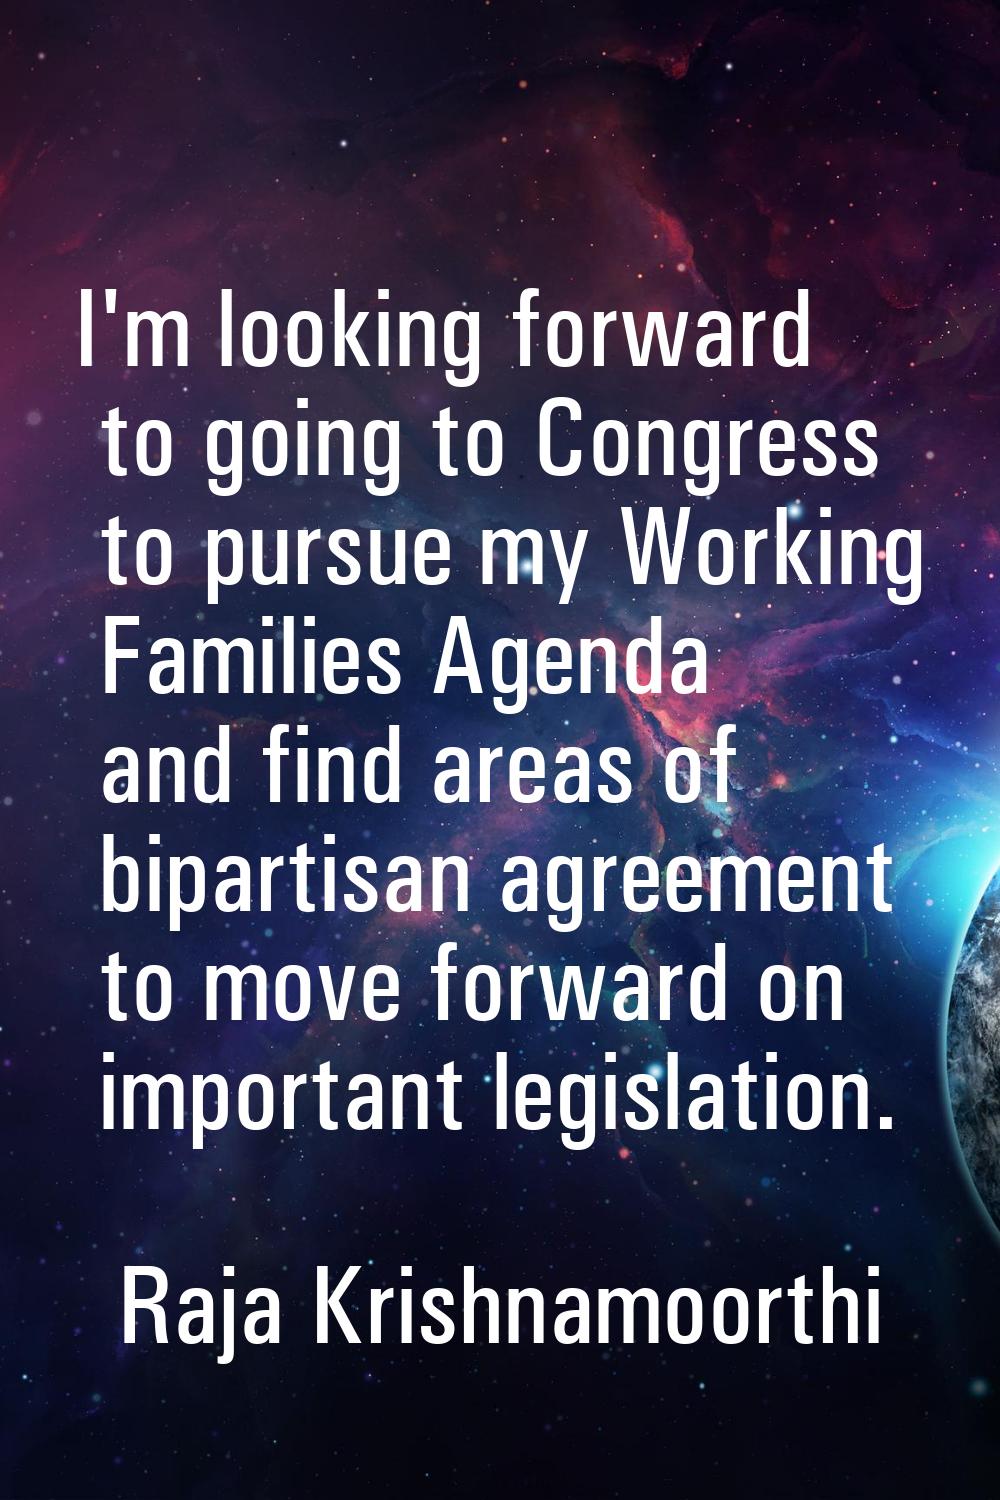 I'm looking forward to going to Congress to pursue my Working Families Agenda and find areas of bip